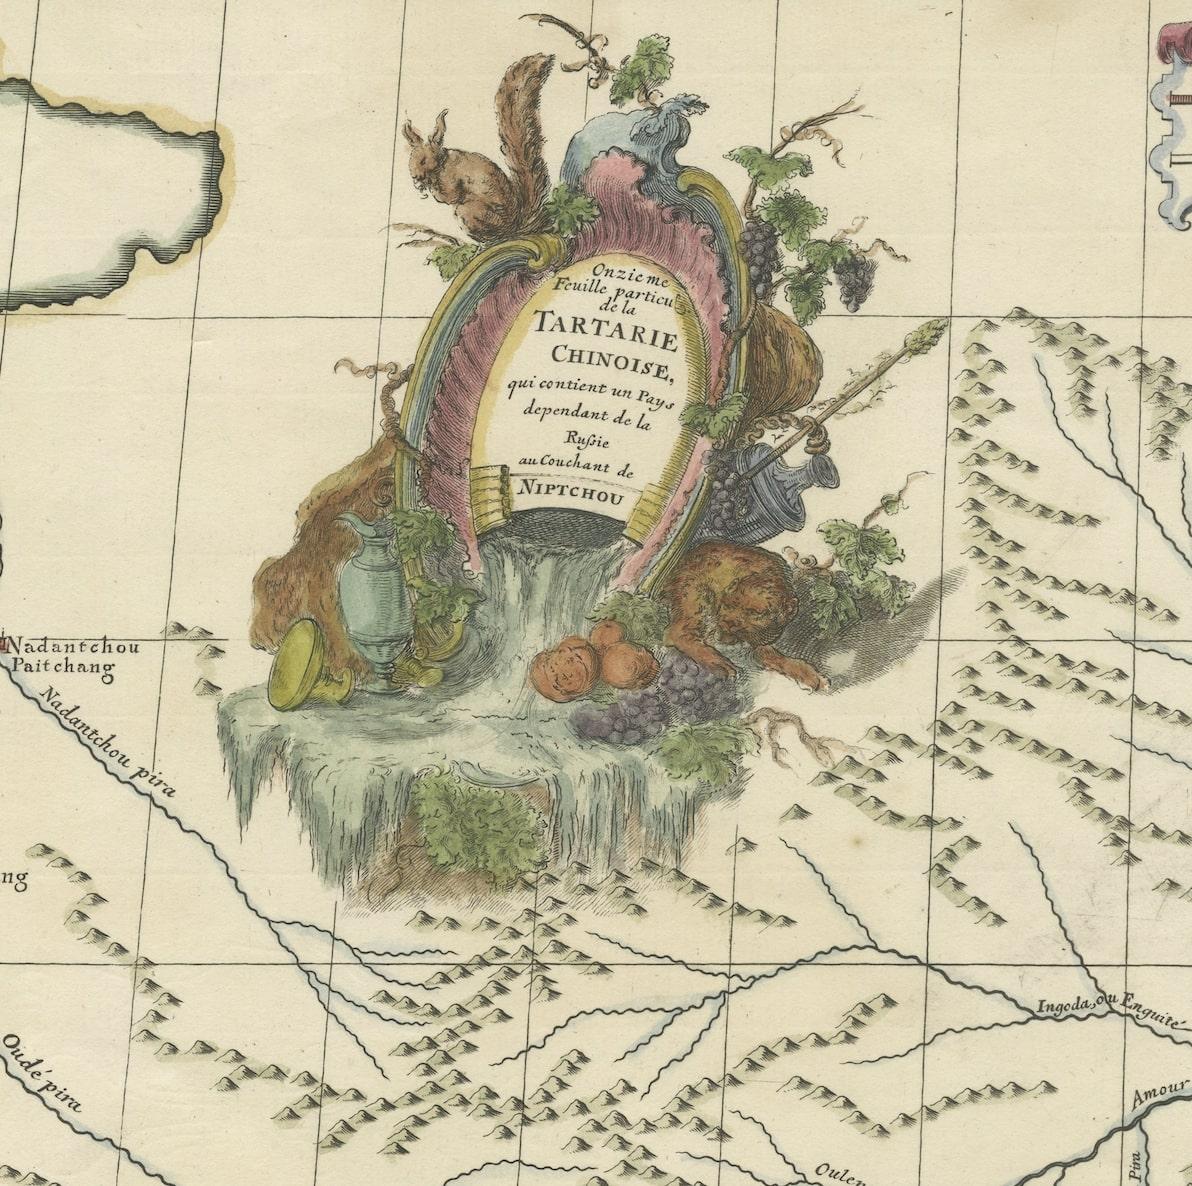 The antique map titled 